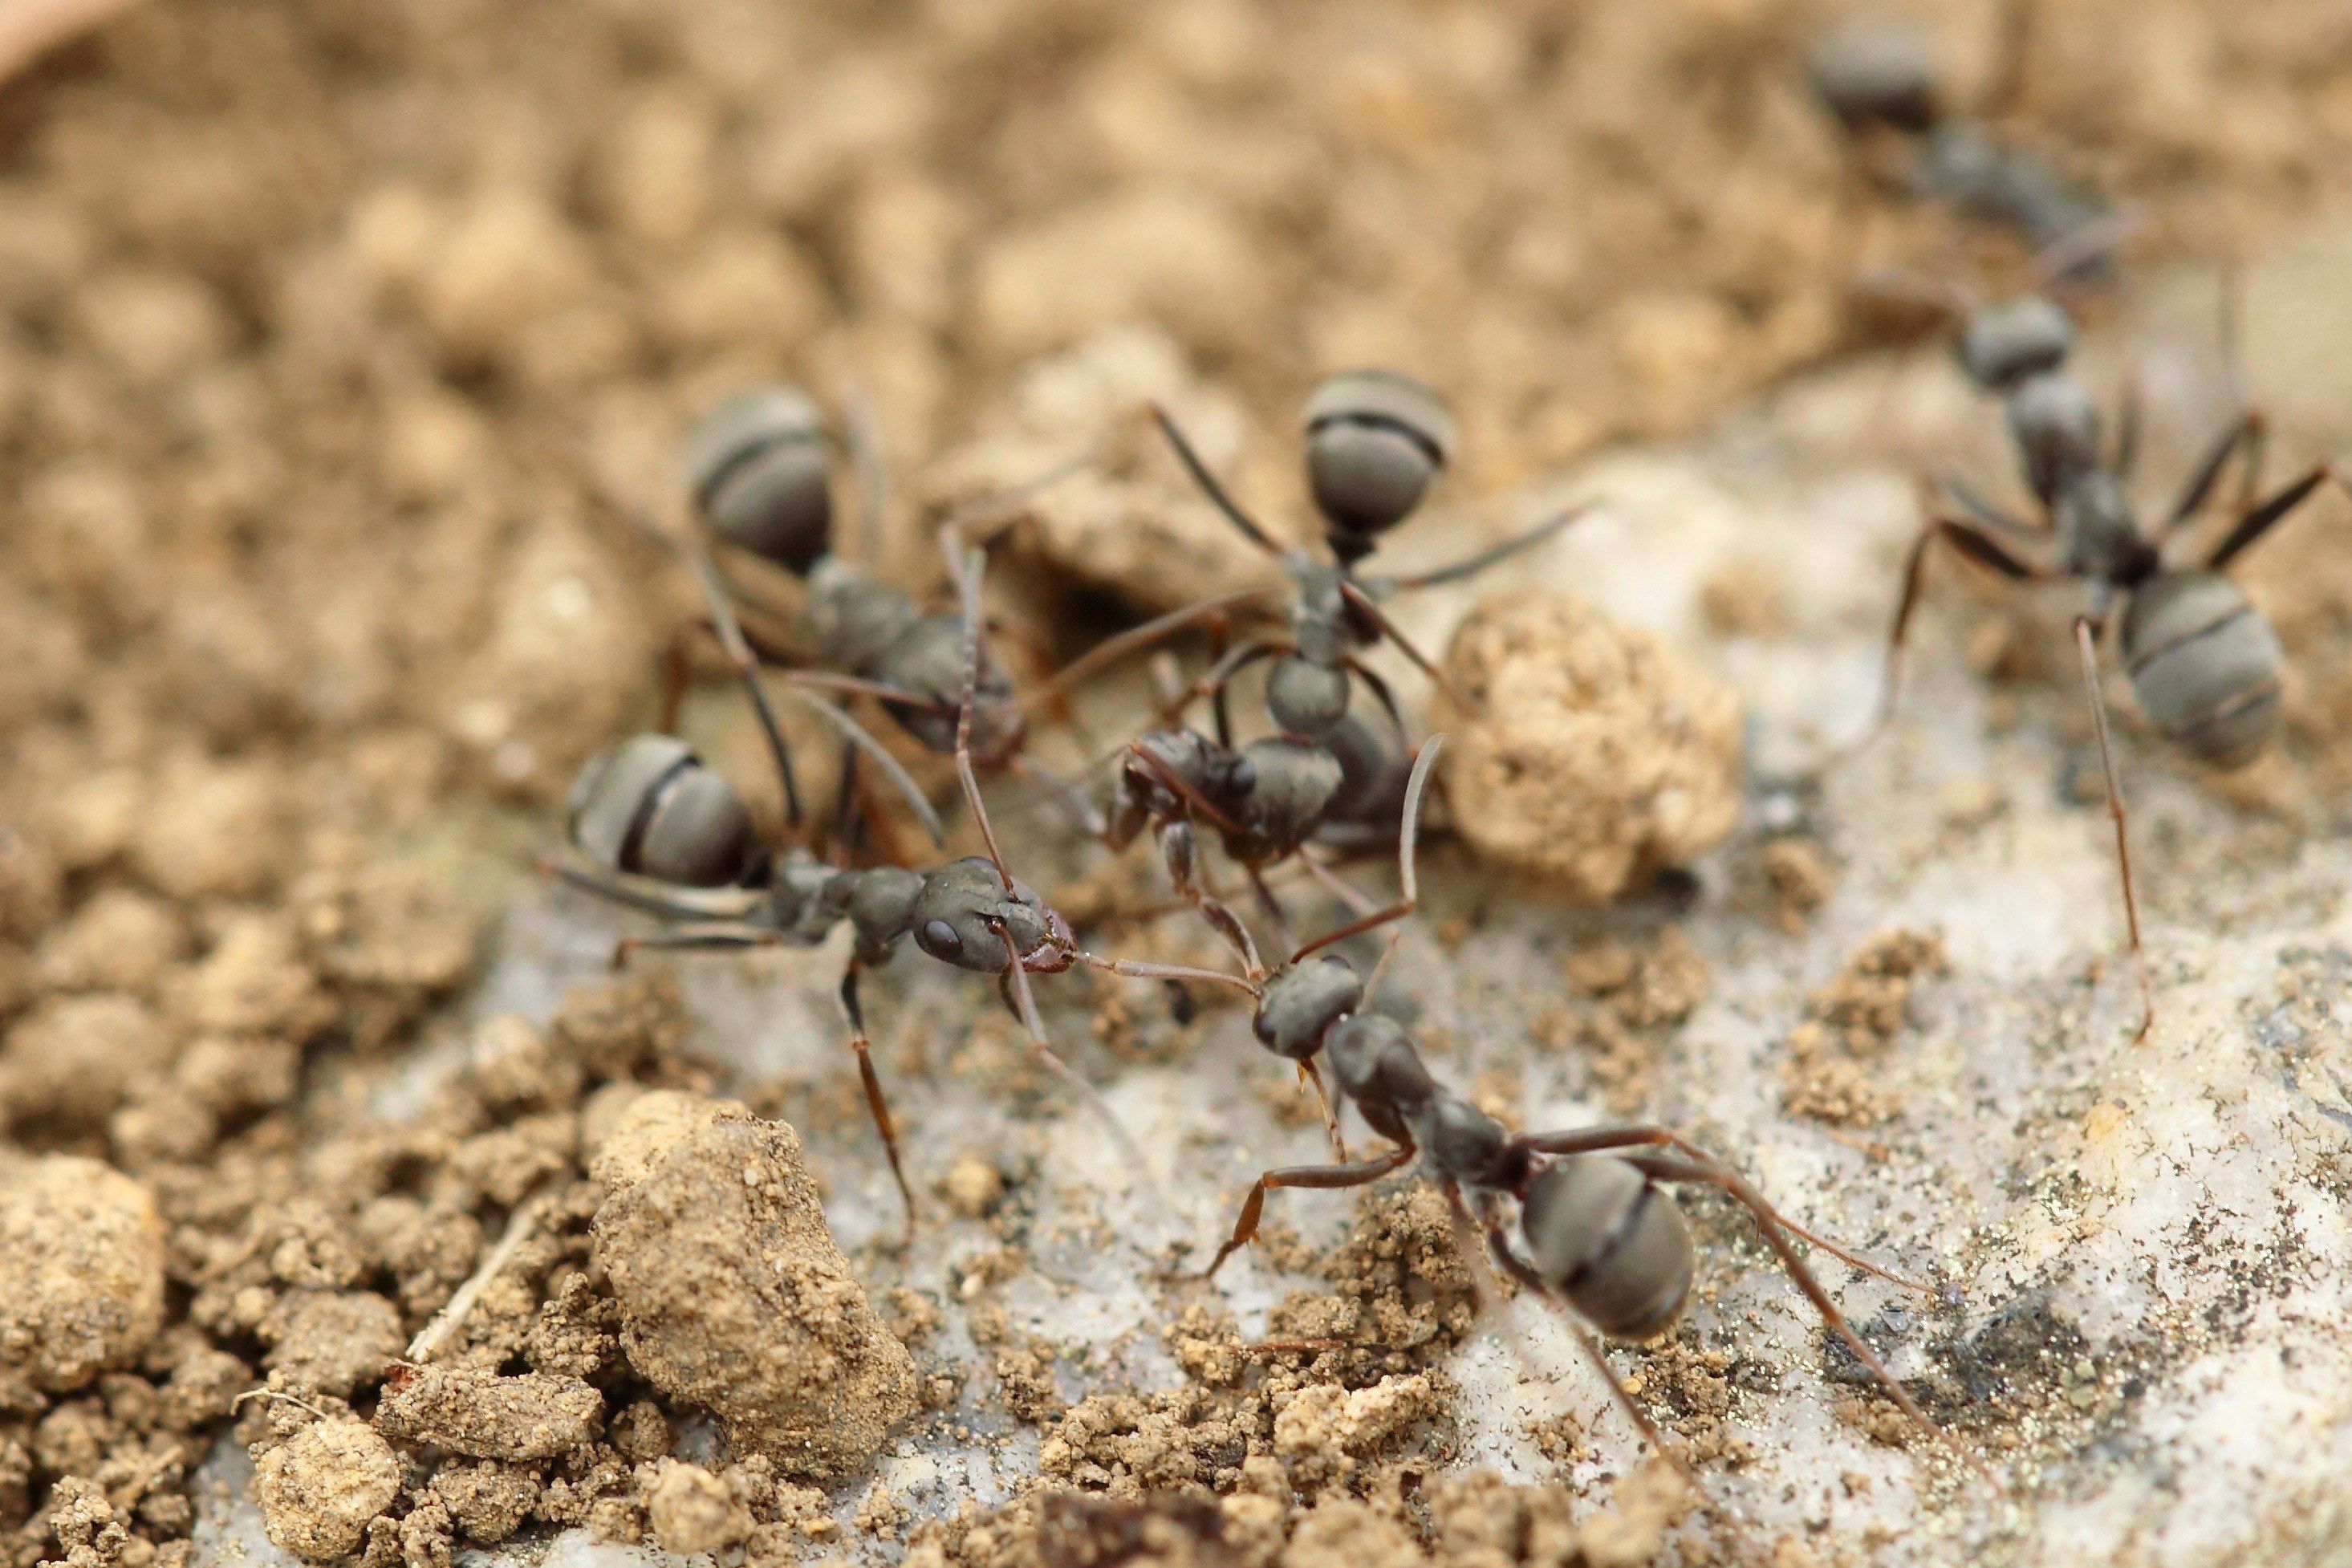 Wallpaper / group of ant insects working together on sandy ground, ants sandy ground 4k wallpaper